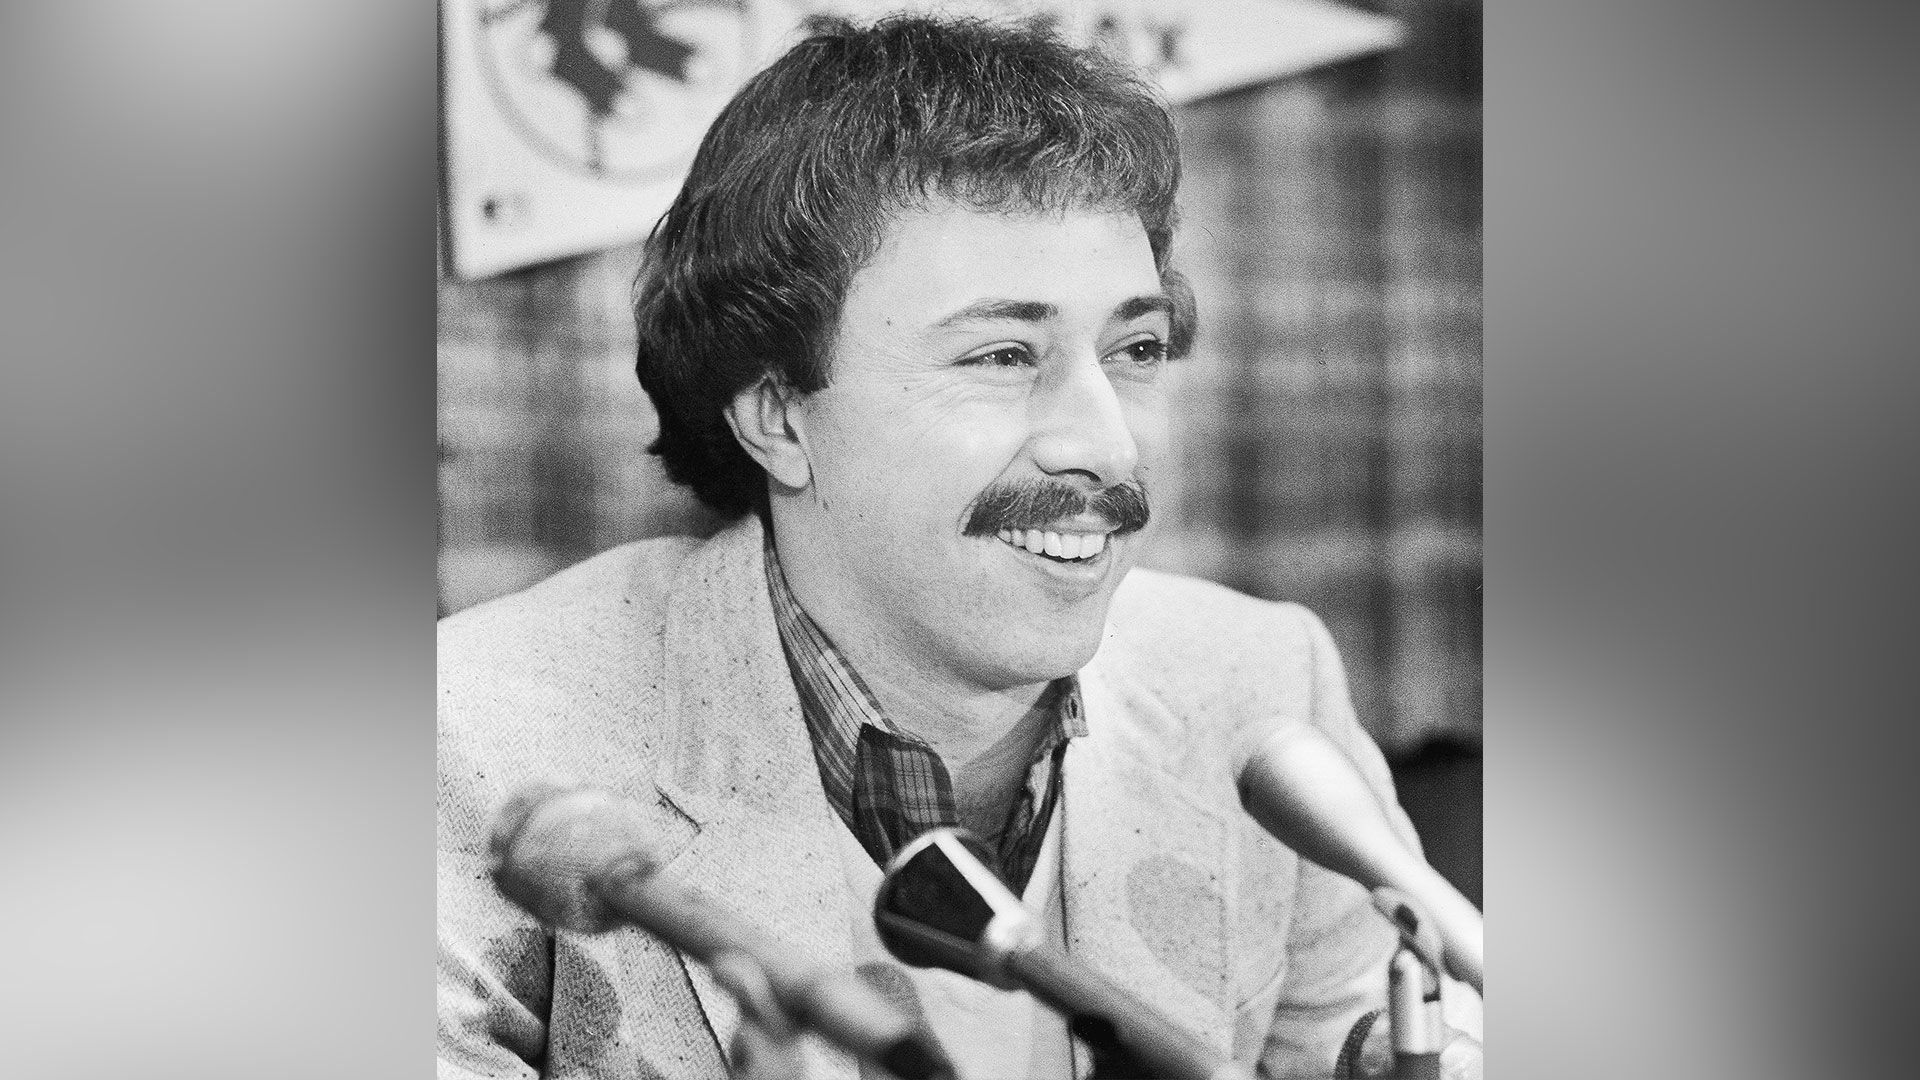 Boston Red Sox broadcaster, ex-player Jerry Remy dies at age 68 - ESPN